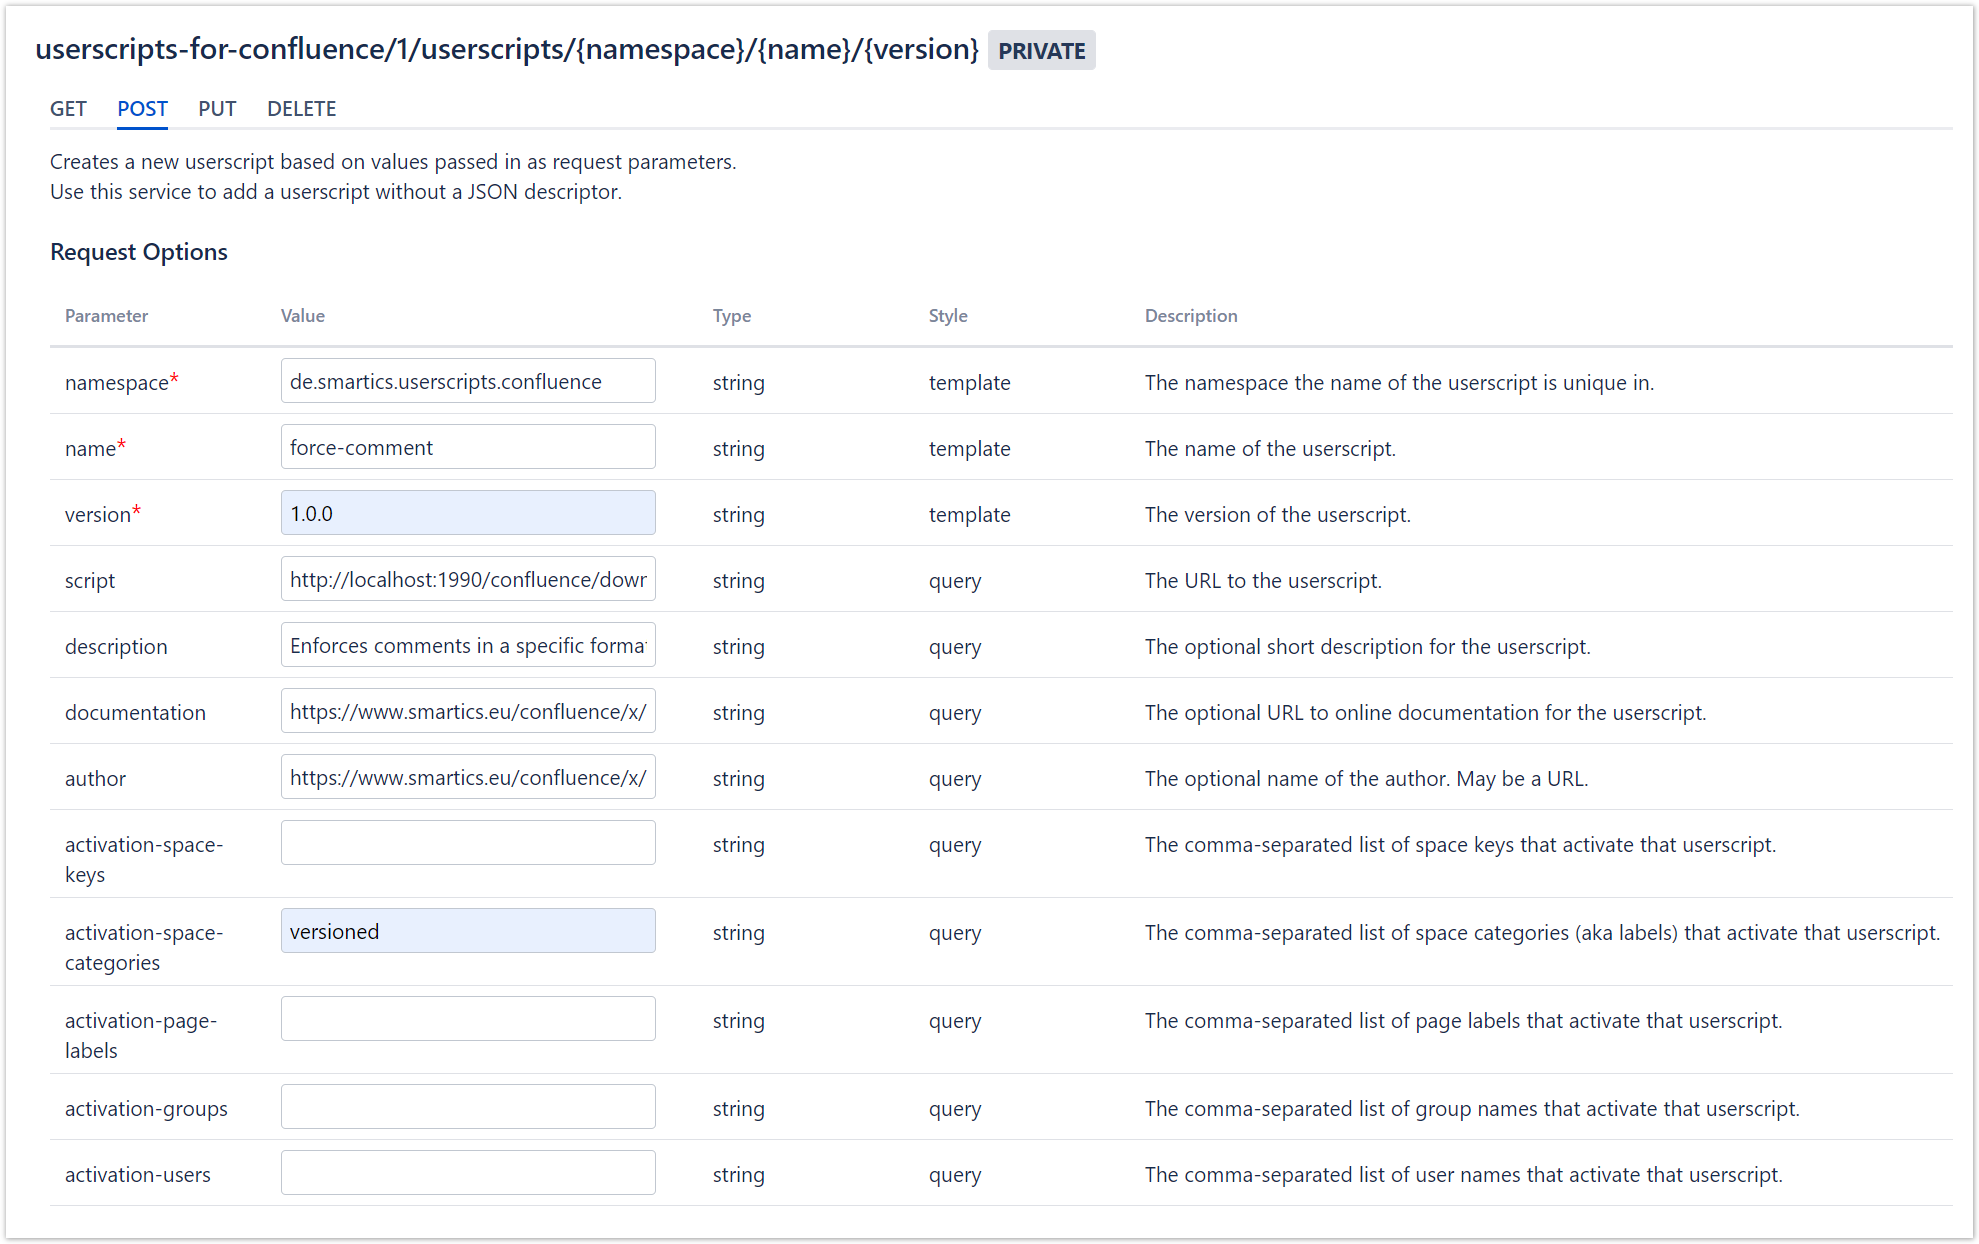 Screenshot of the REST API Browser with the configuration for this userscript.